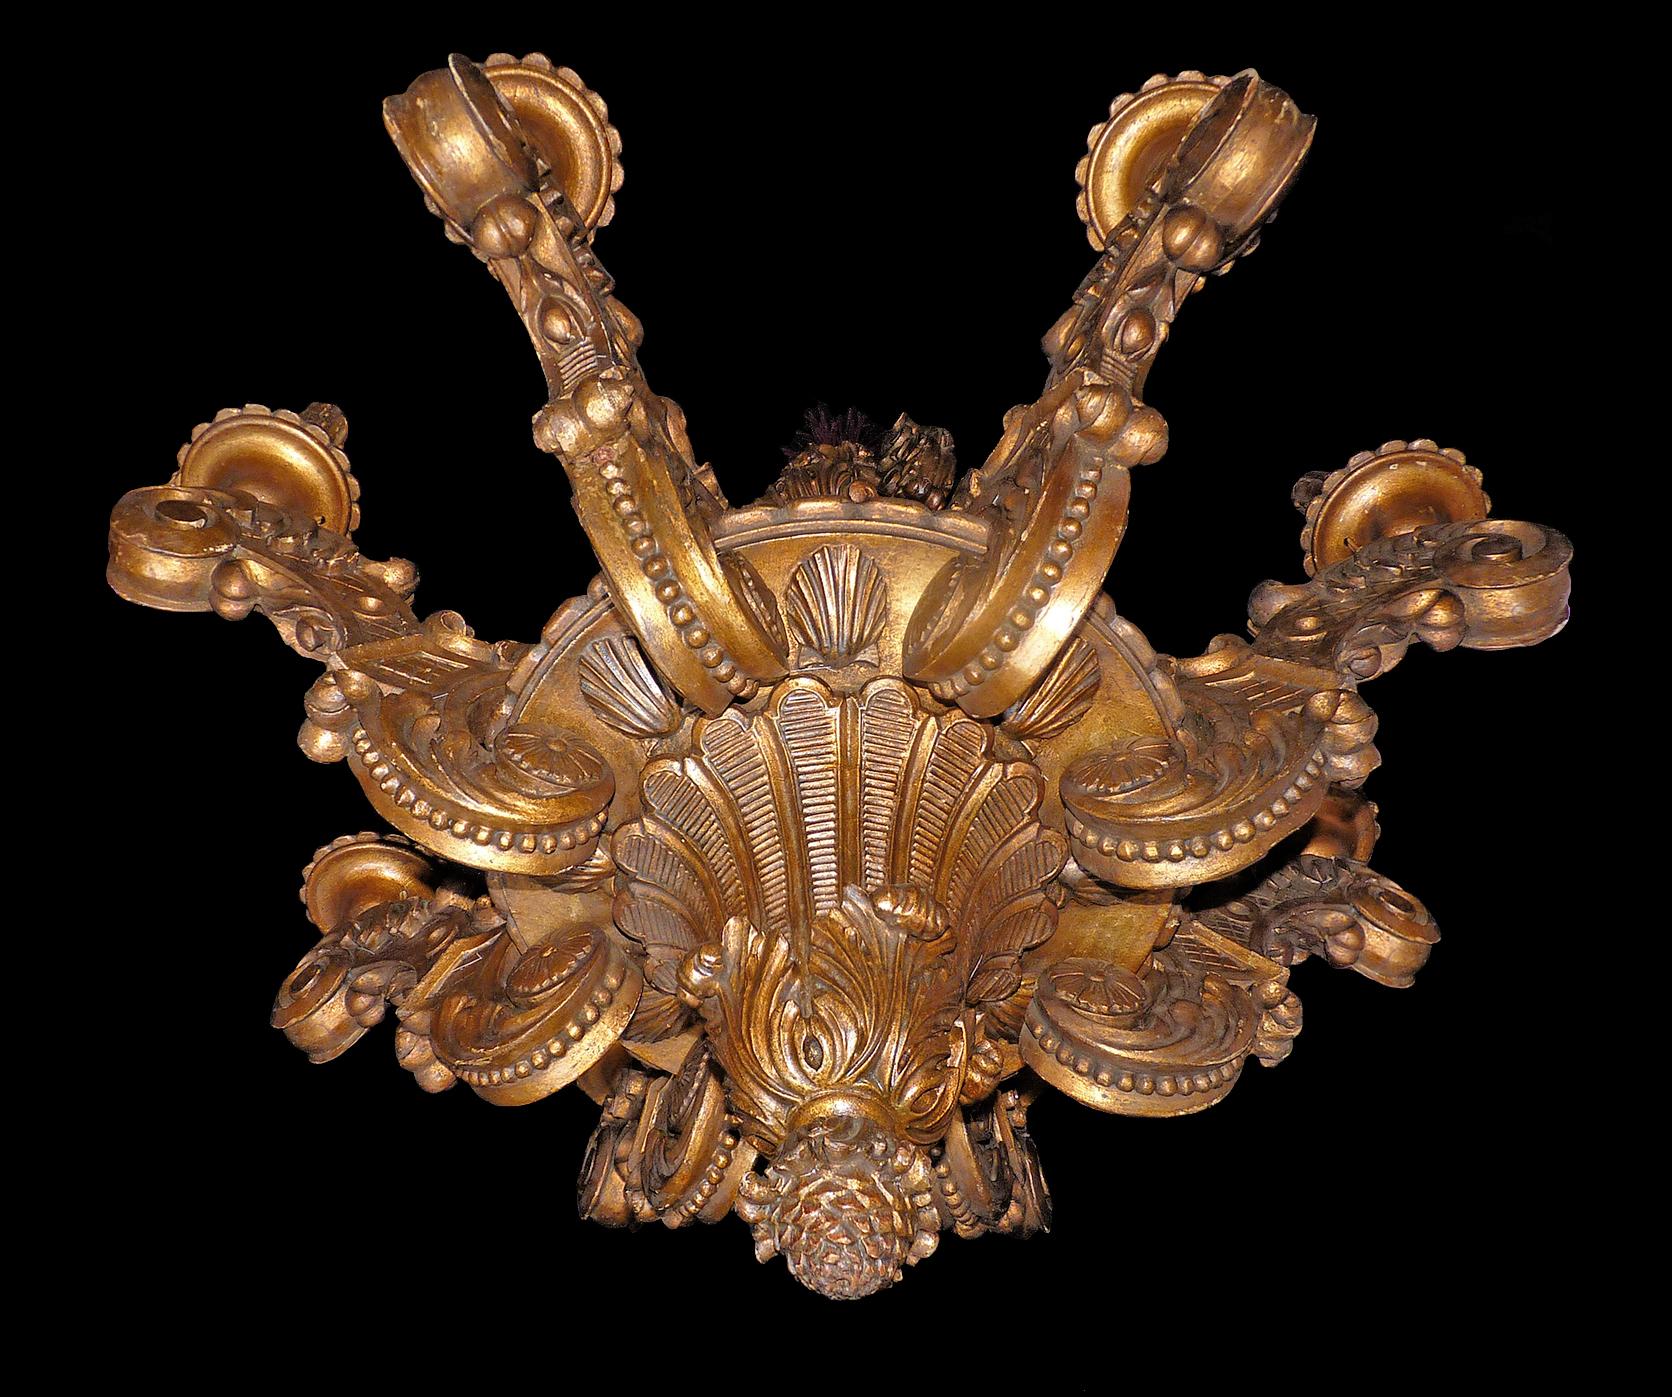 Gold Leaf Massive French Louis XV Baroque Gilt Carved Wood 8-Light Chandelier 19th Century For Sale